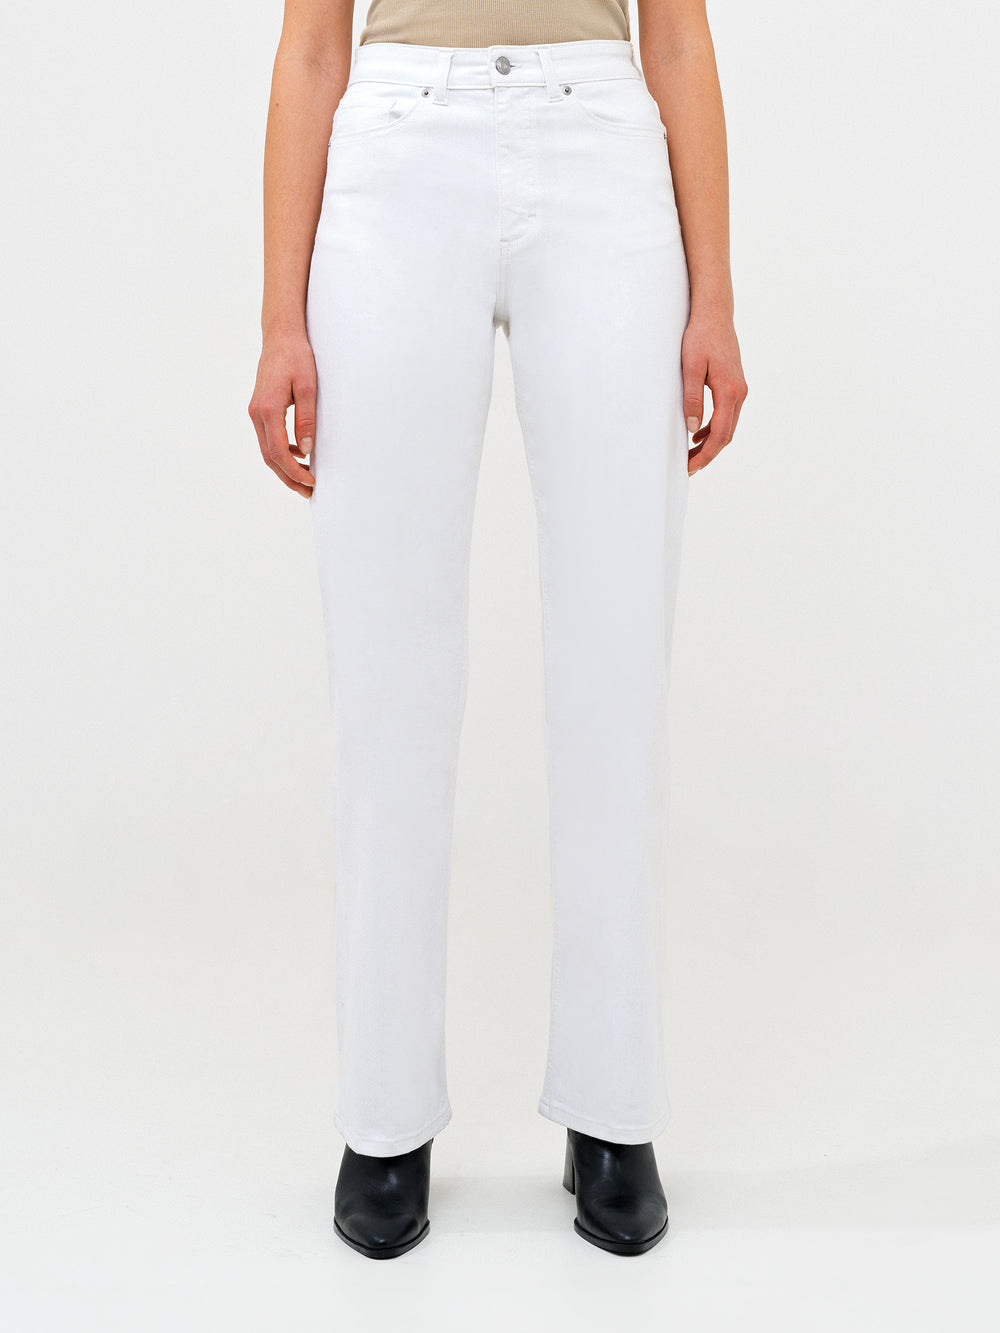 Denim Stretch Wide Leg Jeans Jeans | French Connection UK